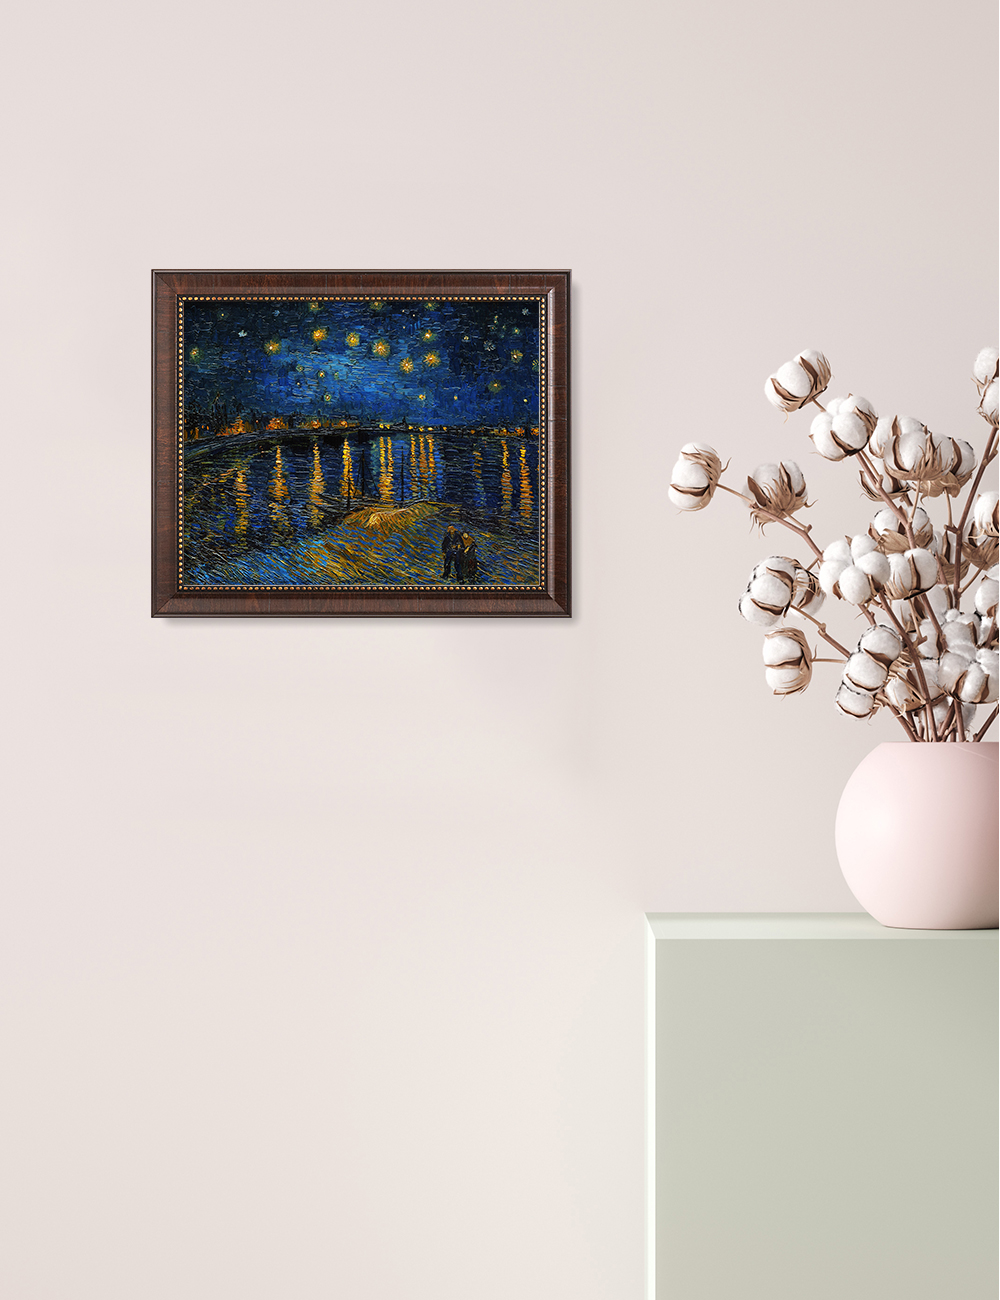 DECORARTS Starry Night Over The Rhone Vincent Van Gogh Giclee Prints w/  Antique Brown Frame for Wall Decor. Picture Size: 20x16